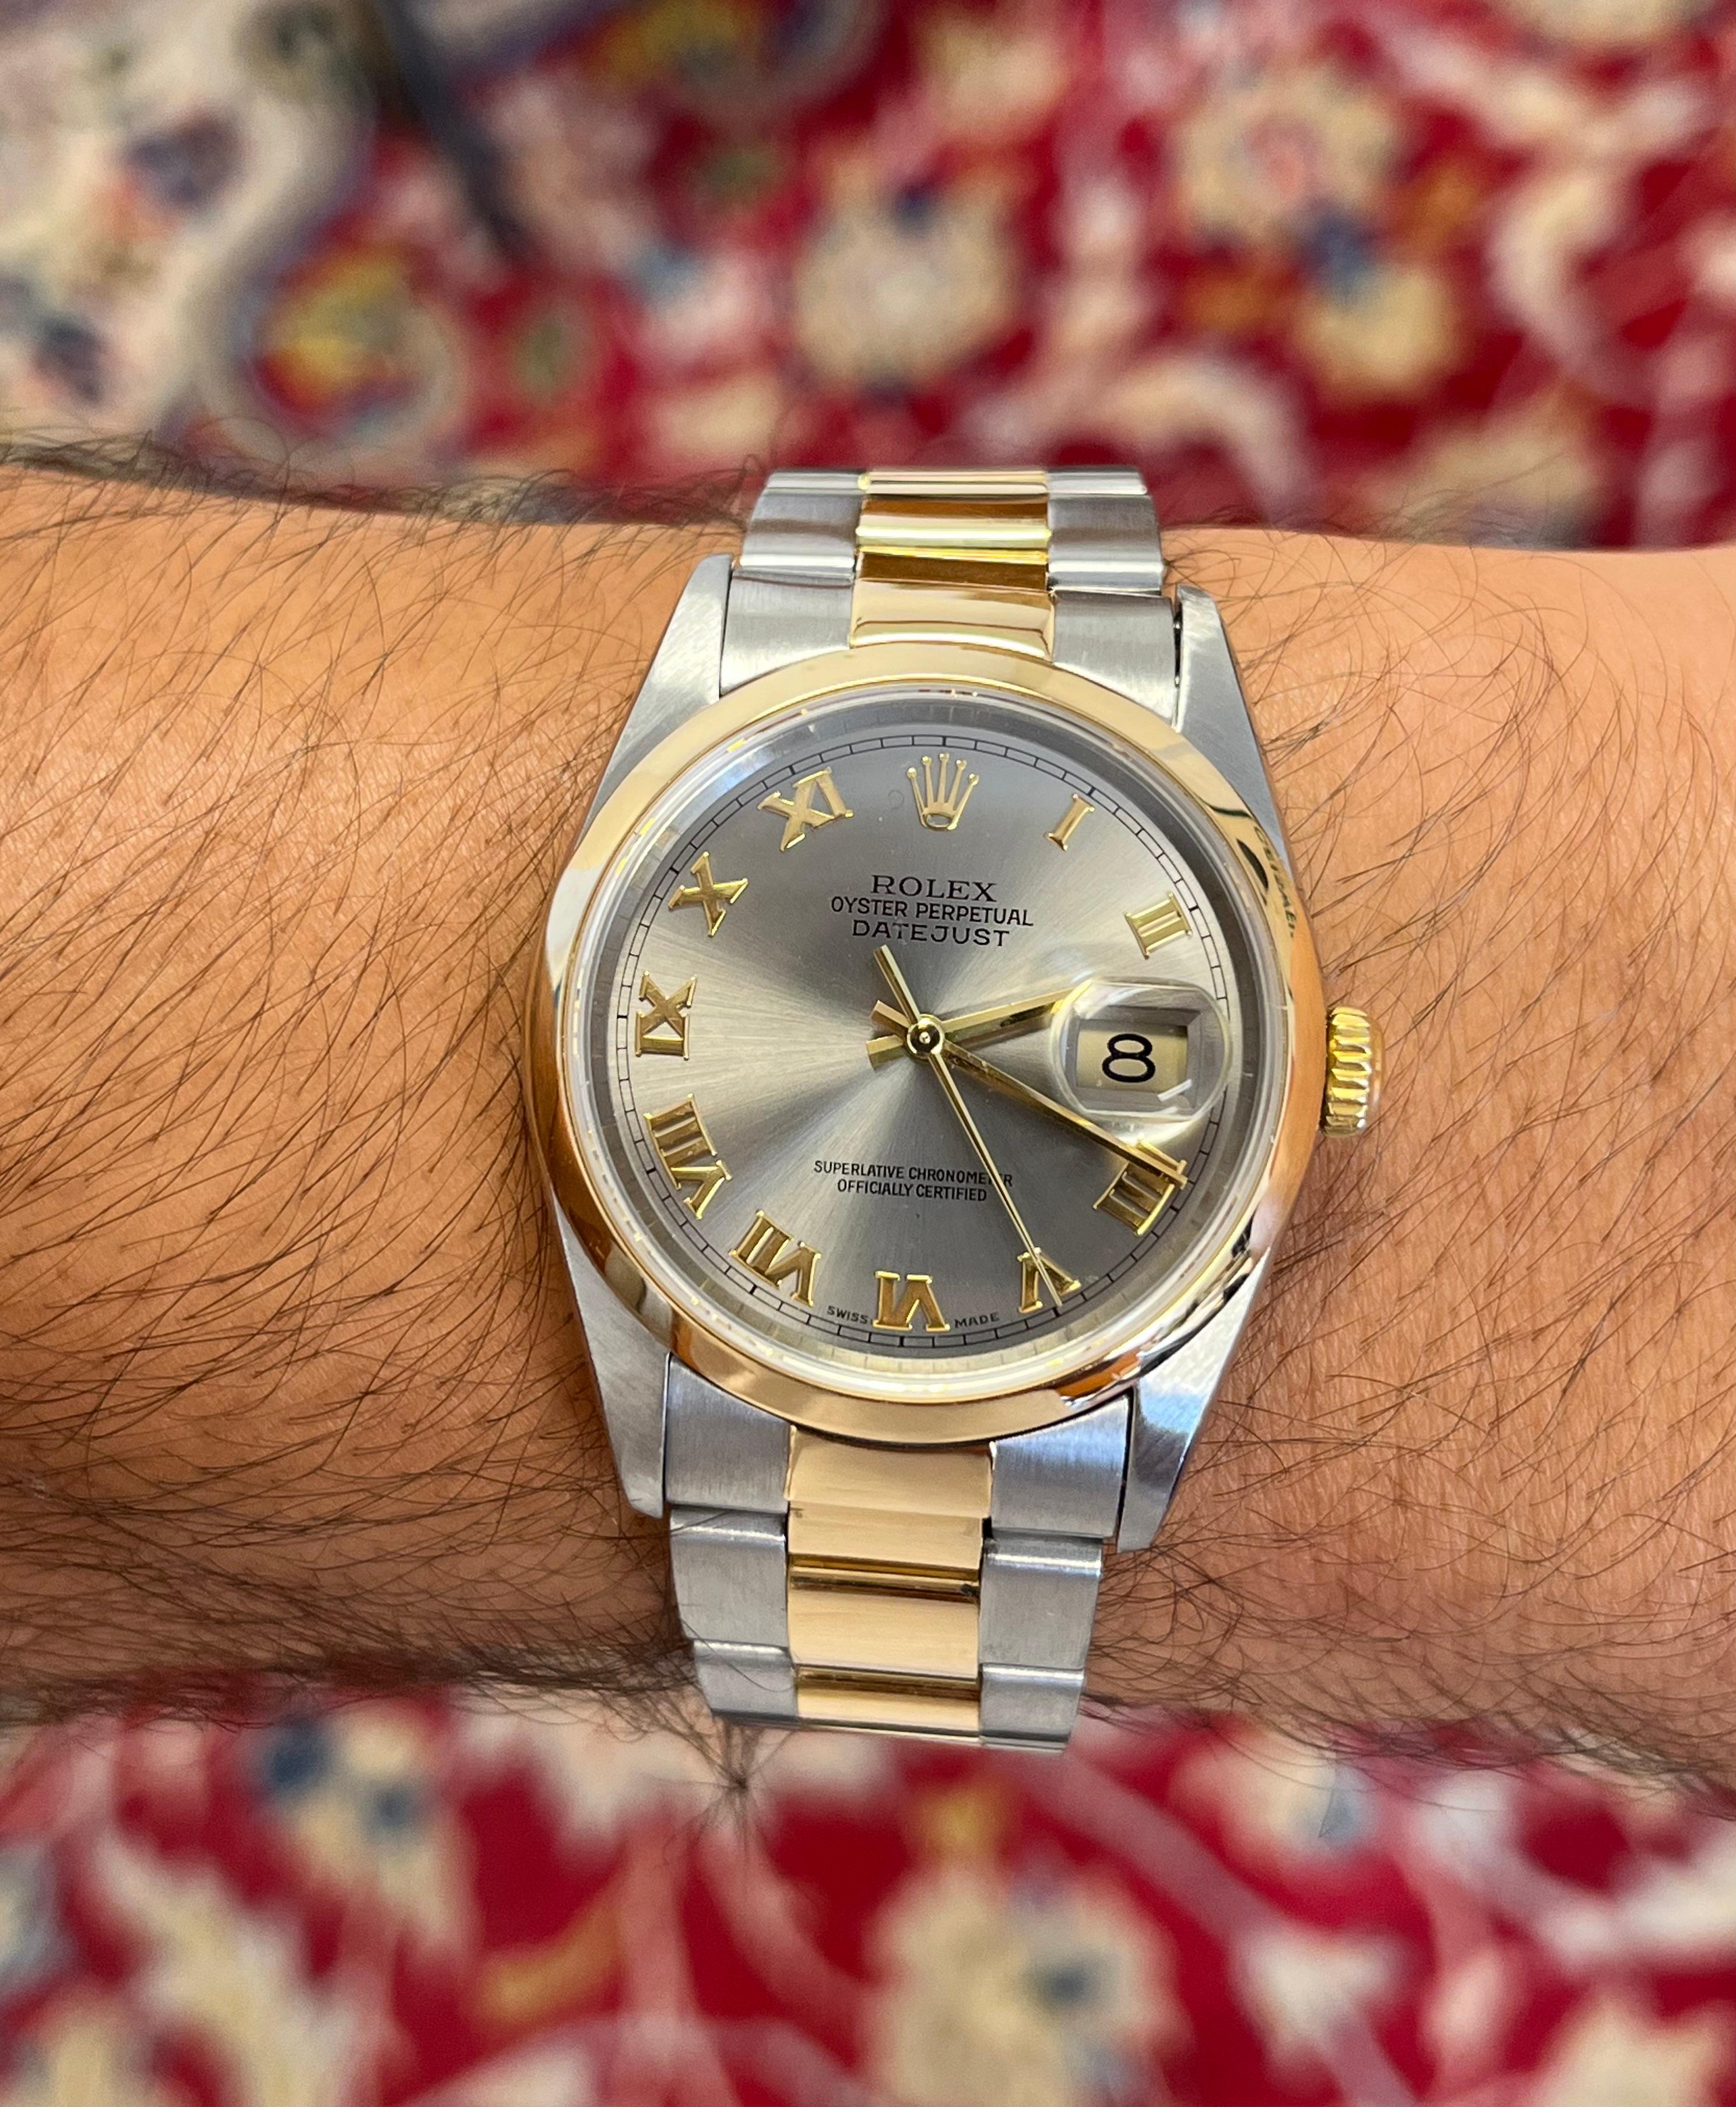 Rolex Datejust 36mm 16203 with Gray and Gold roman numeral dial. Two-tone Oyster bracelet with deployment clasp. A chic and classic Rolex with the aesthetic and structural versatility to be worn for dressy and casual wear.

Adjustable Oyster